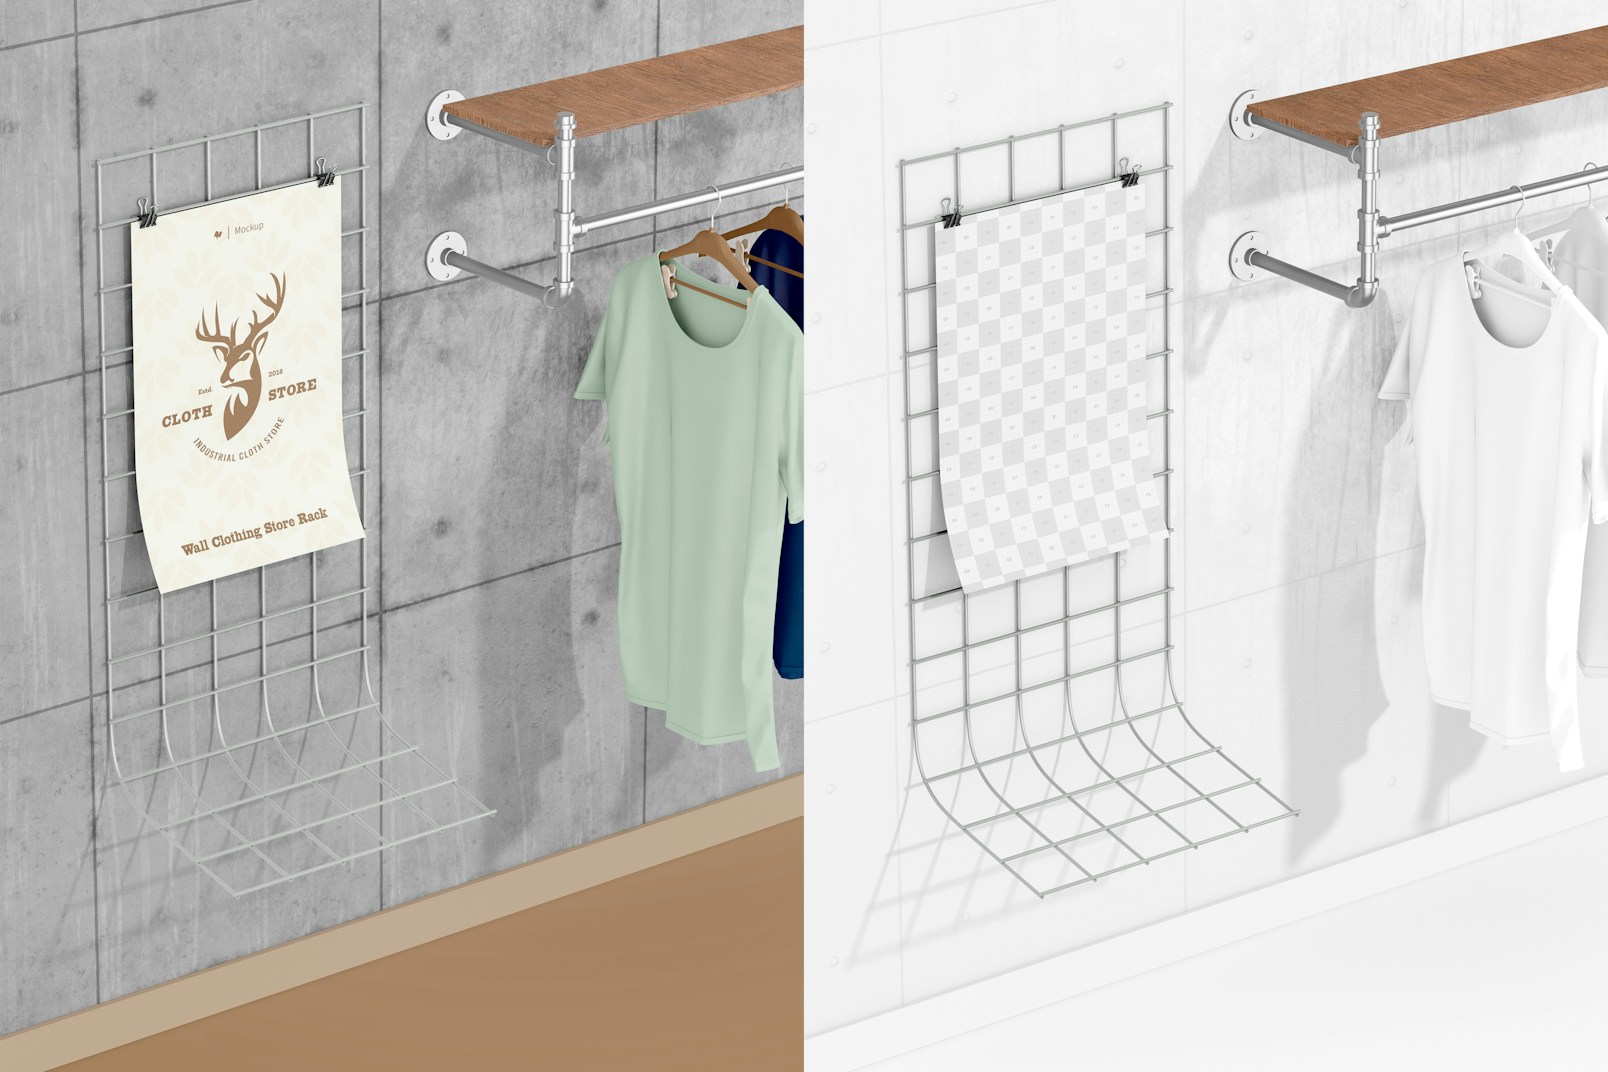 Wall Clothing Store Rack Mockup, Perspective